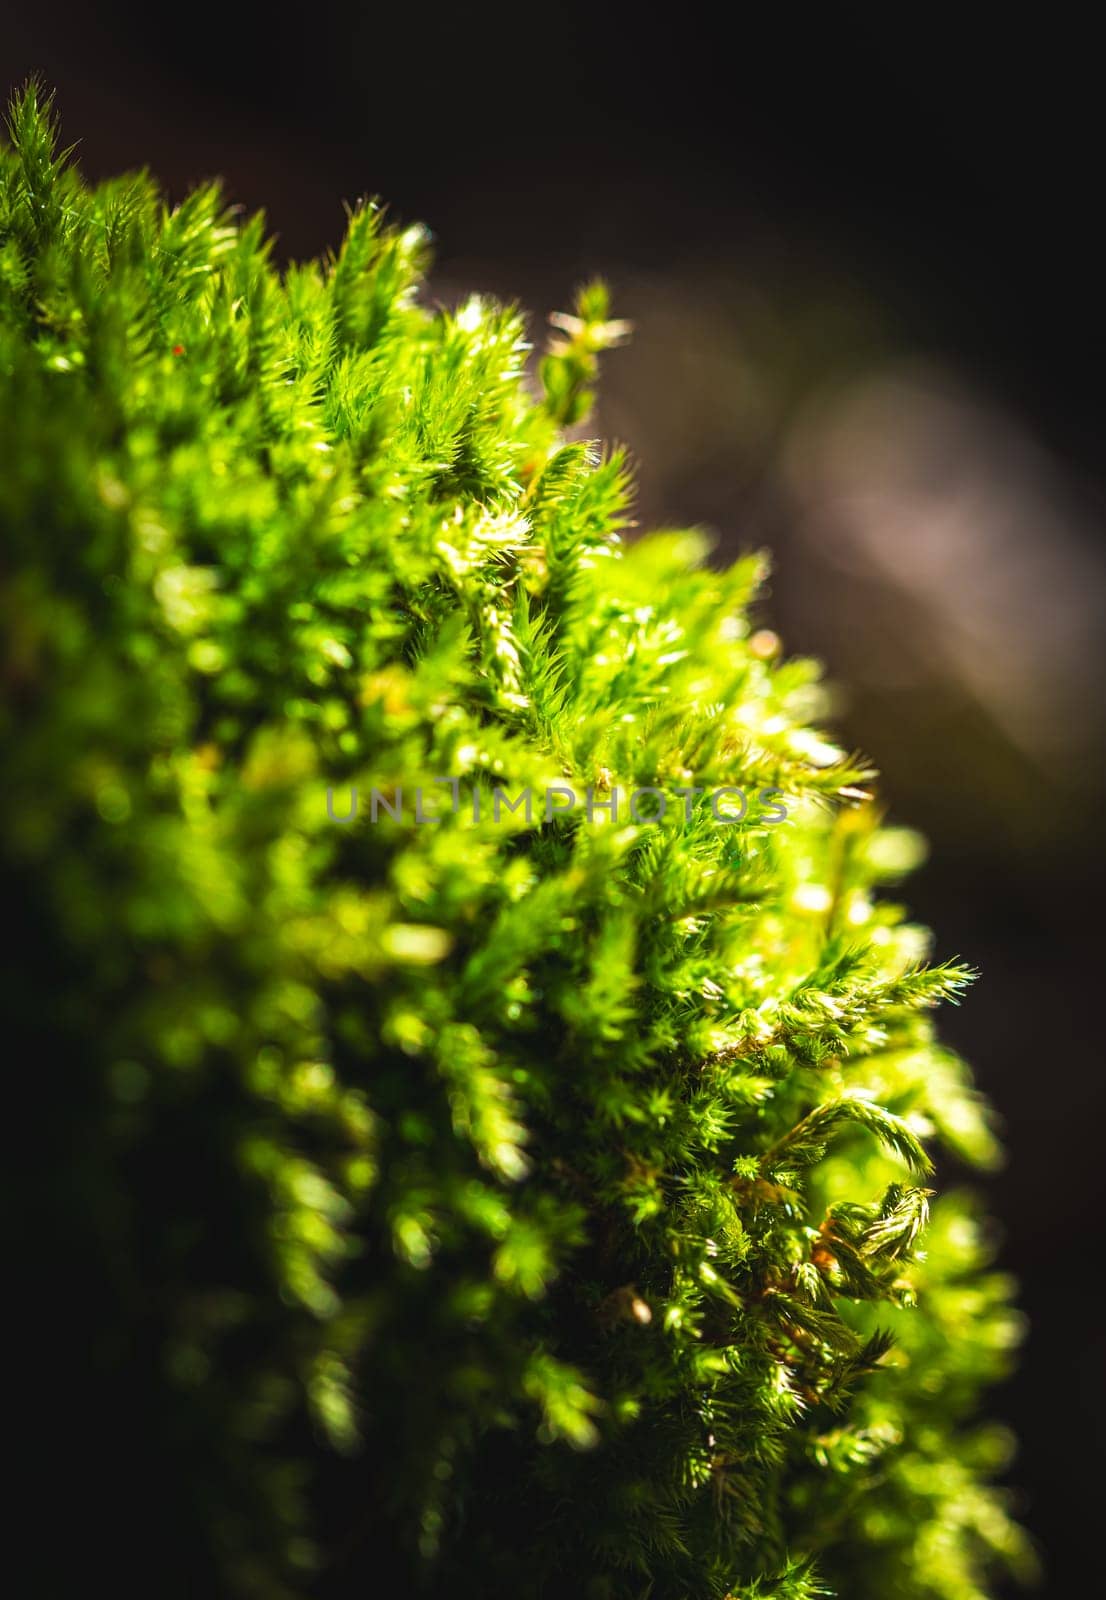 Moss on stone in damp forest. close-up and selective focus